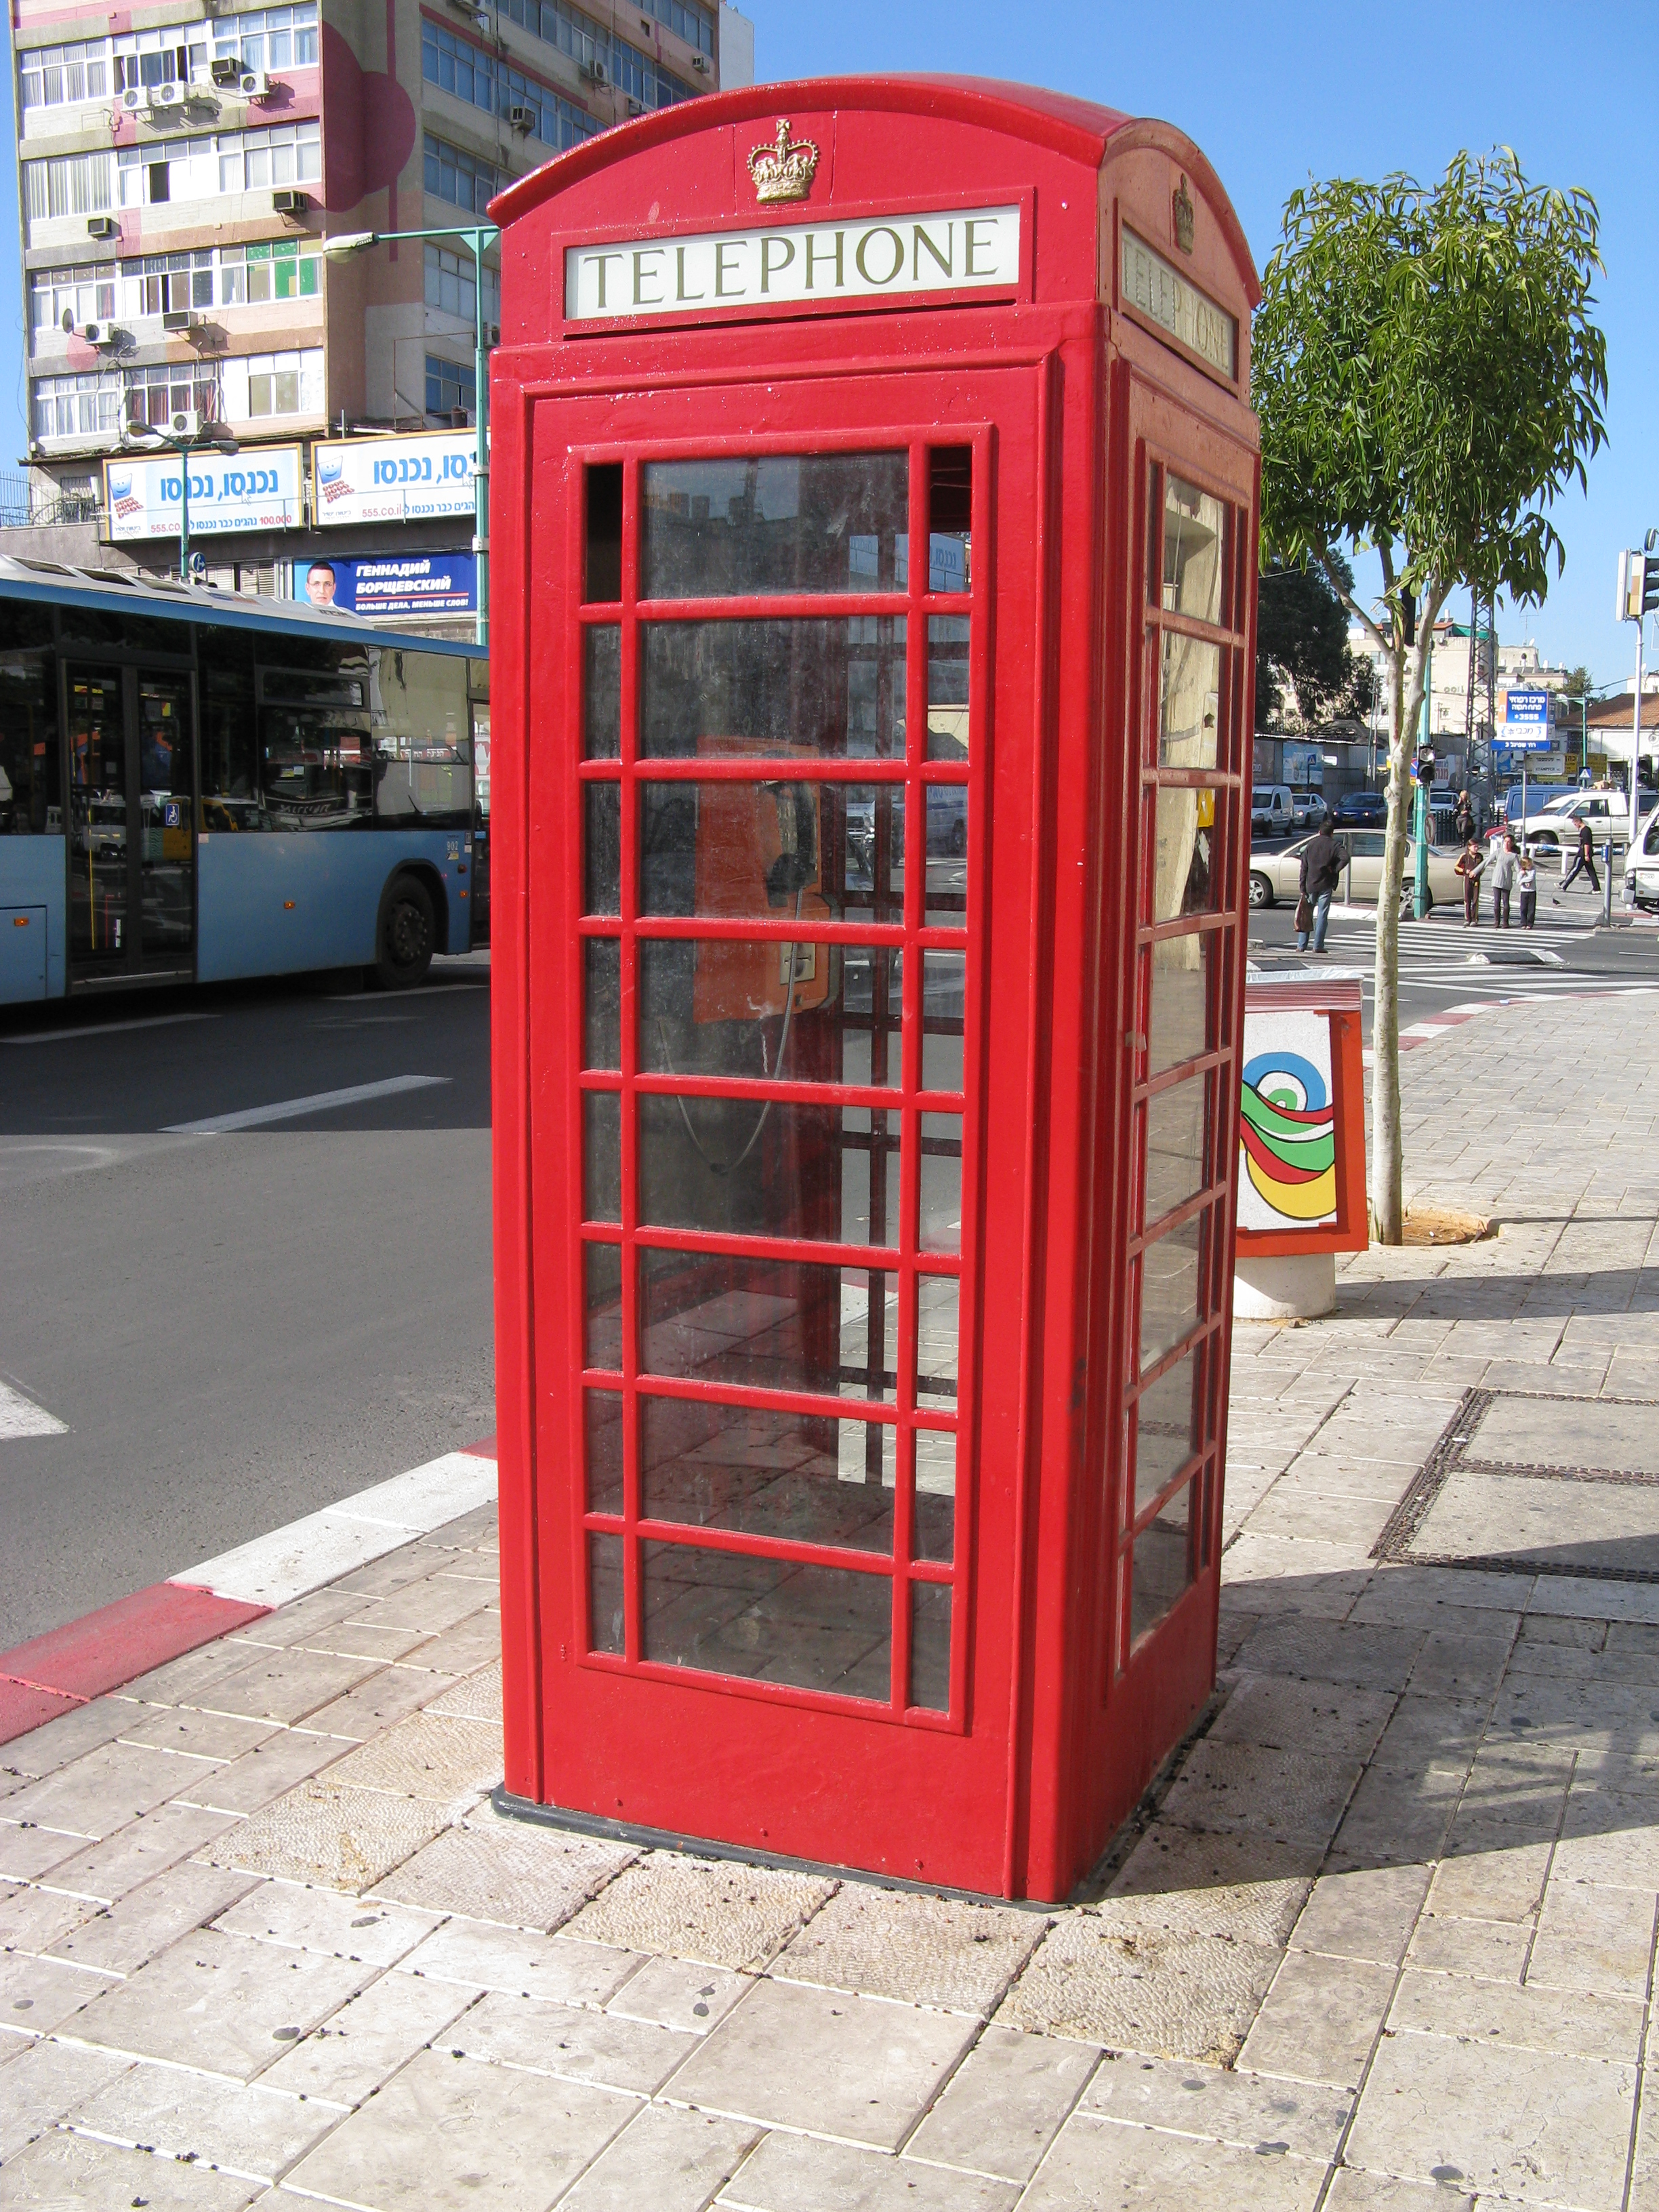 File:PT-Phone Booth.jpg - Wikimedia Commons